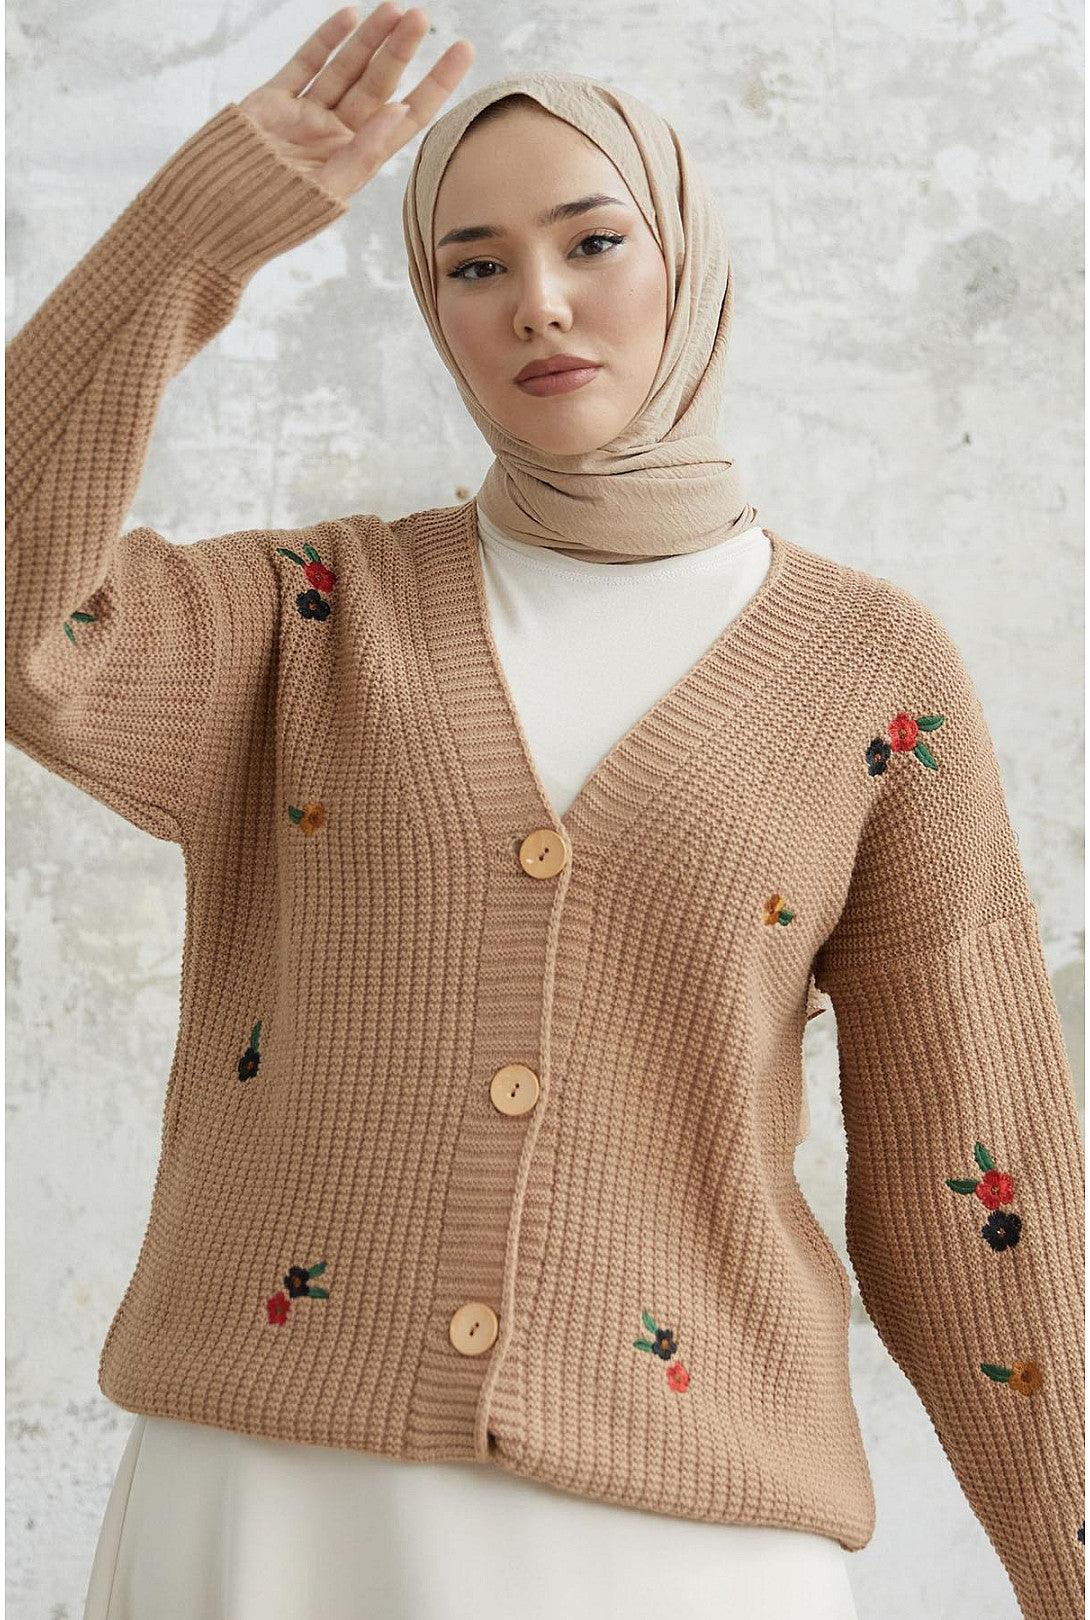 Floral Knitted Cardigan Sweater - Camel Brown